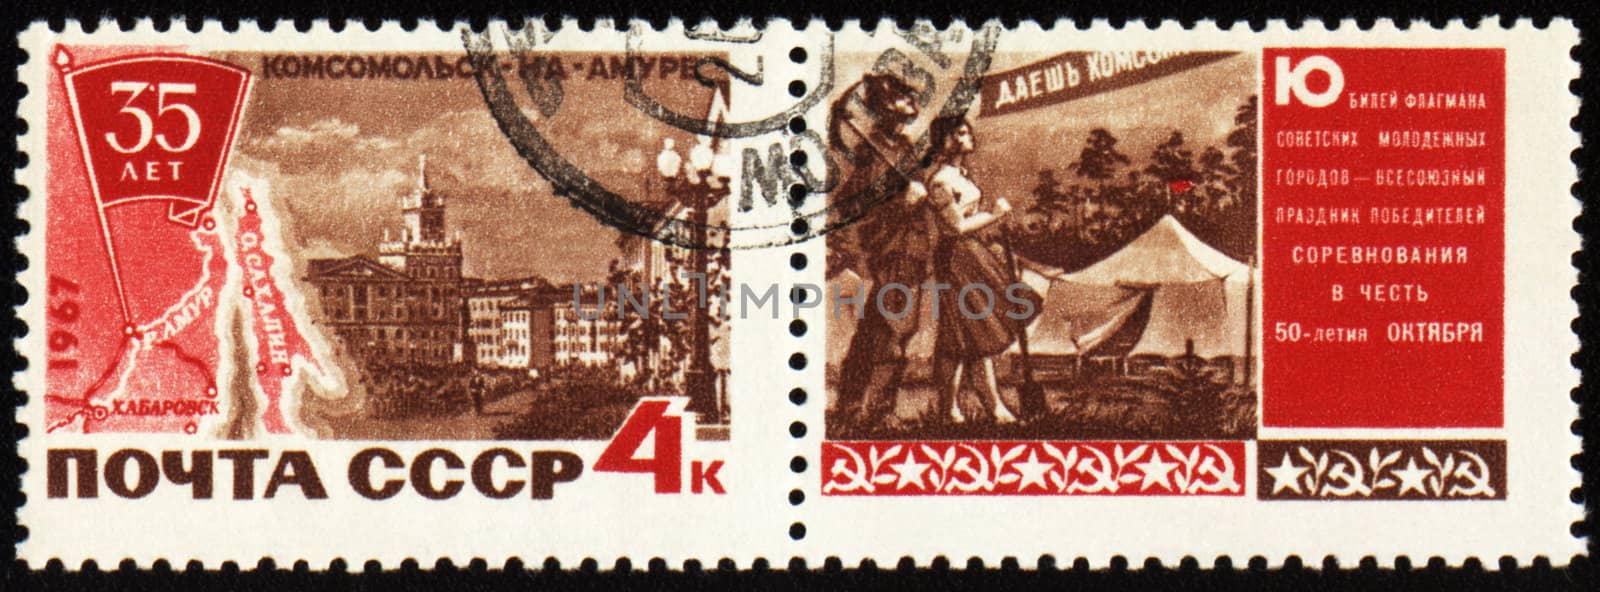 USSR - CIRCA 1967: A stamp printed in USSR, devoted to the 35-th anniversary of Komsomolsk-On-Amur, circa 1967